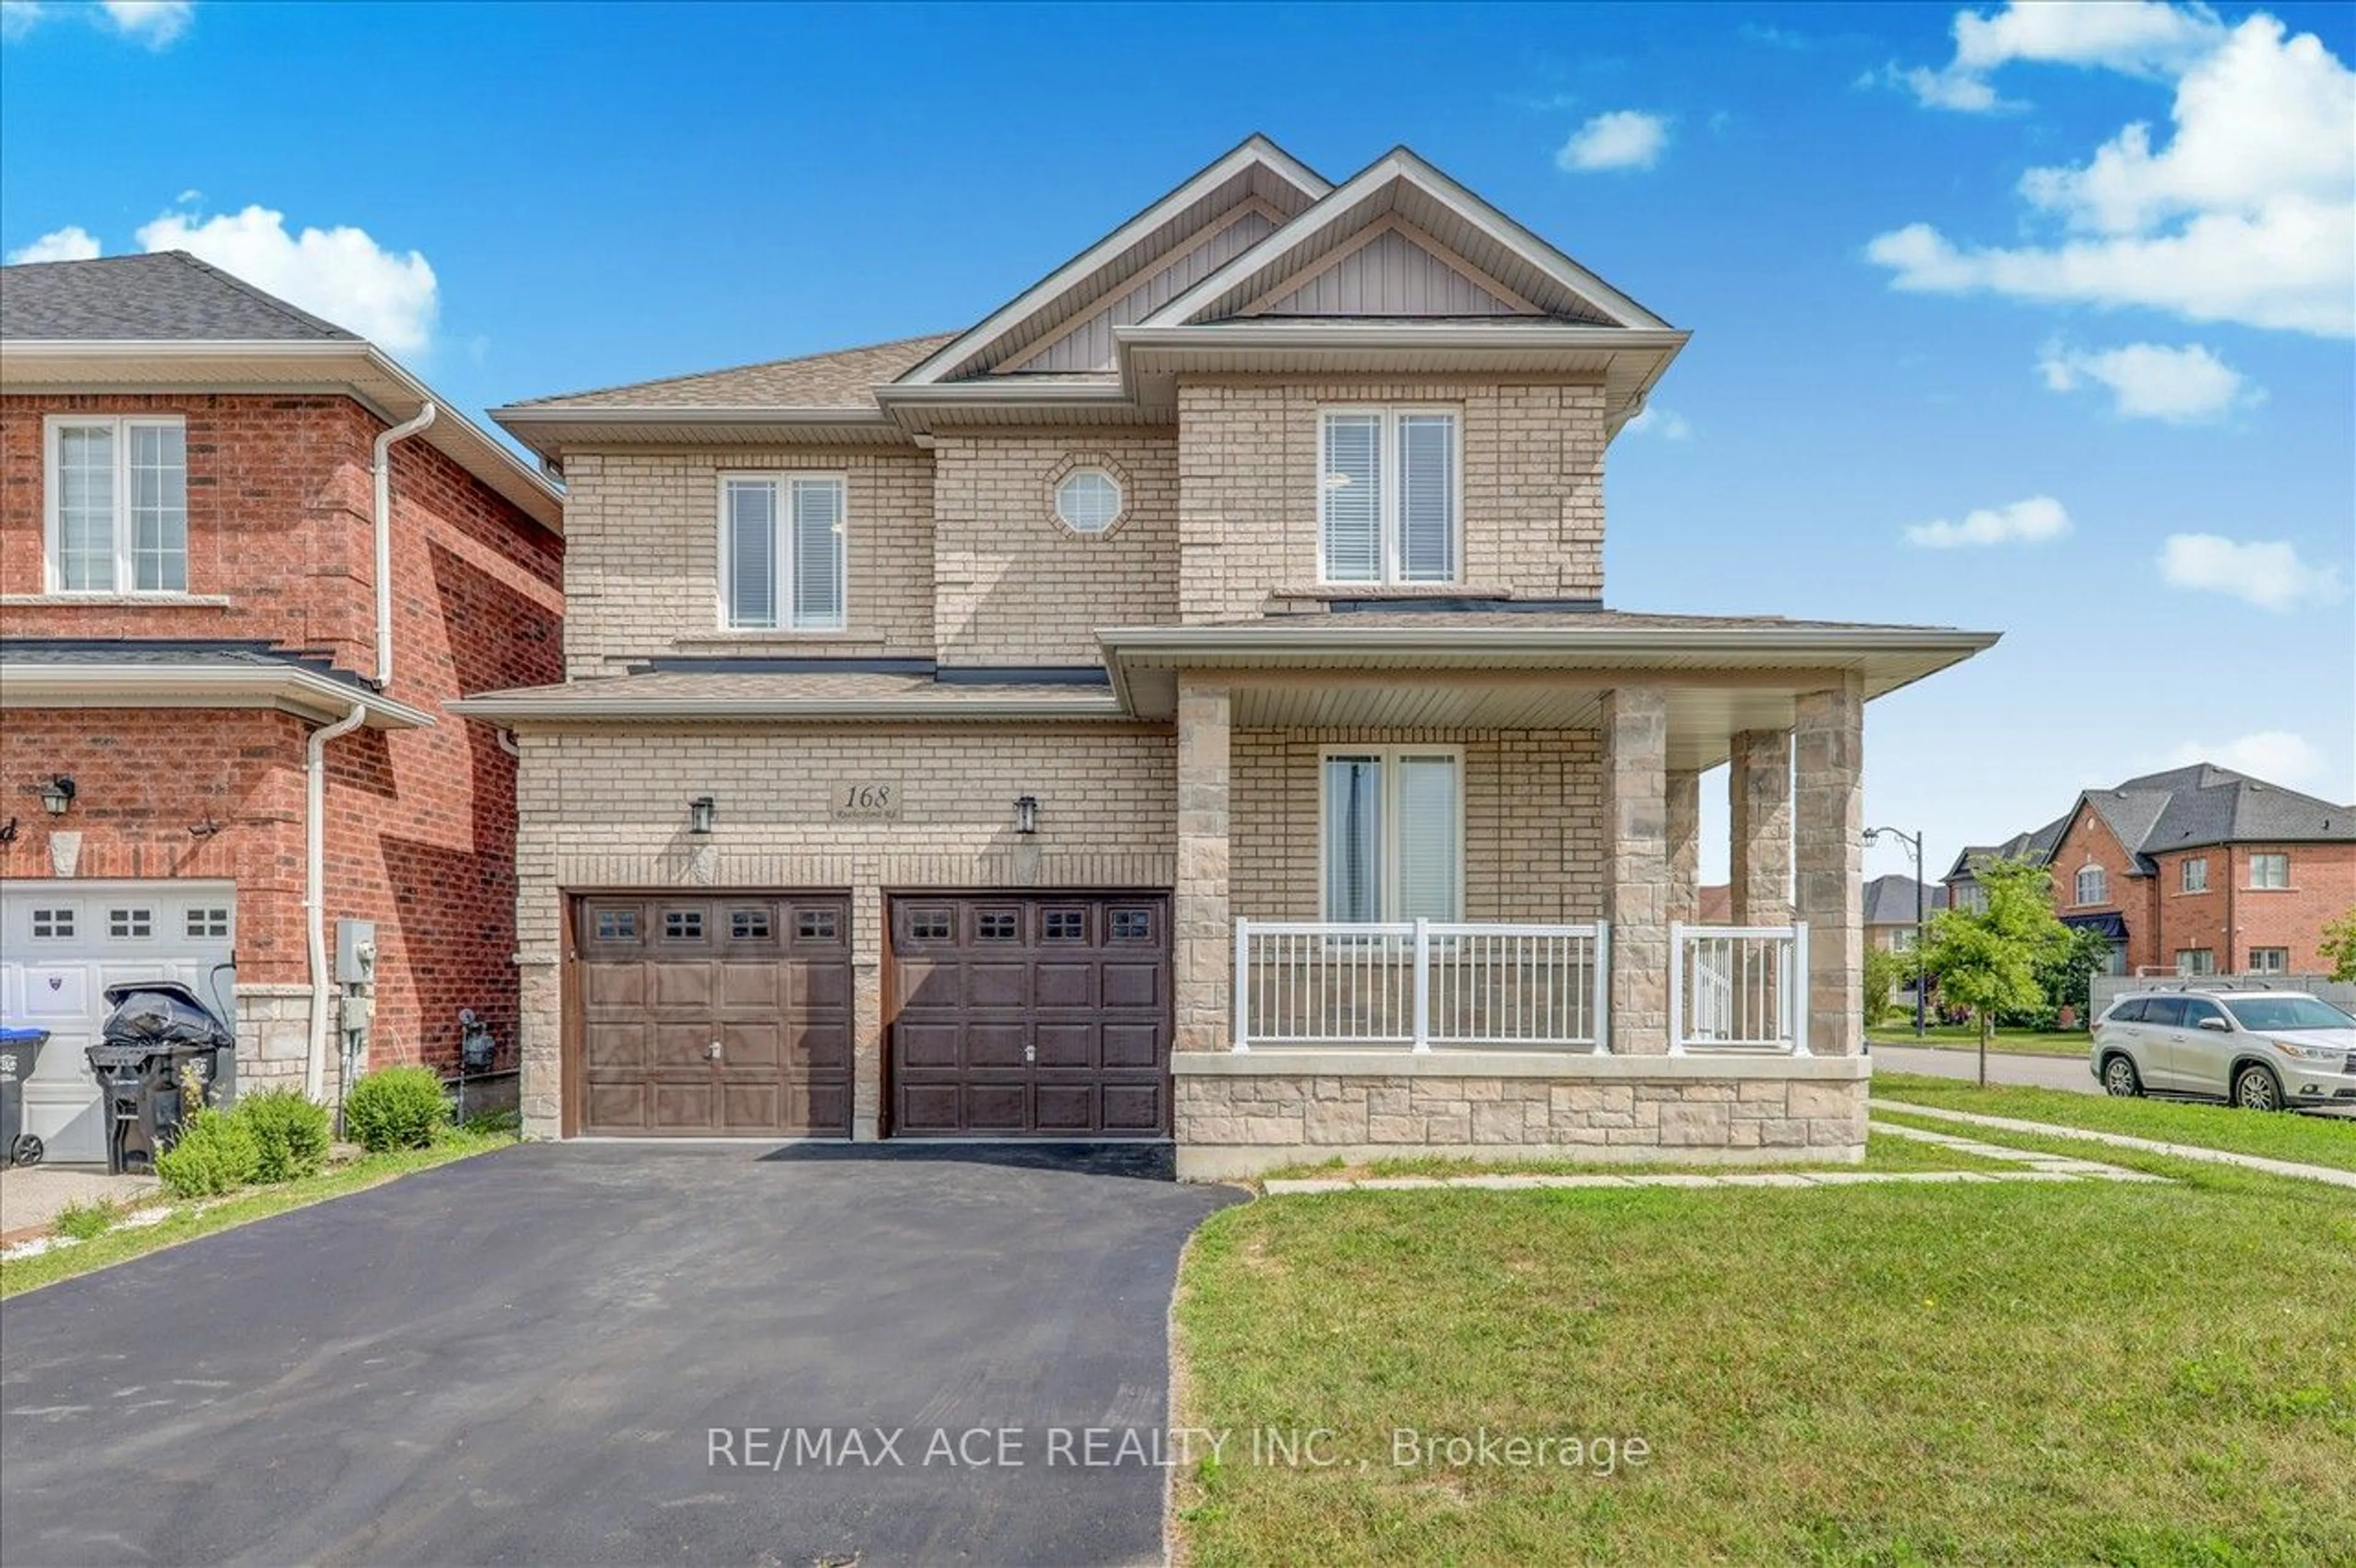 Home with brick exterior material for 168 Rutherford Rd, Bradford West Gwillimbury Ontario L3Z 0B4